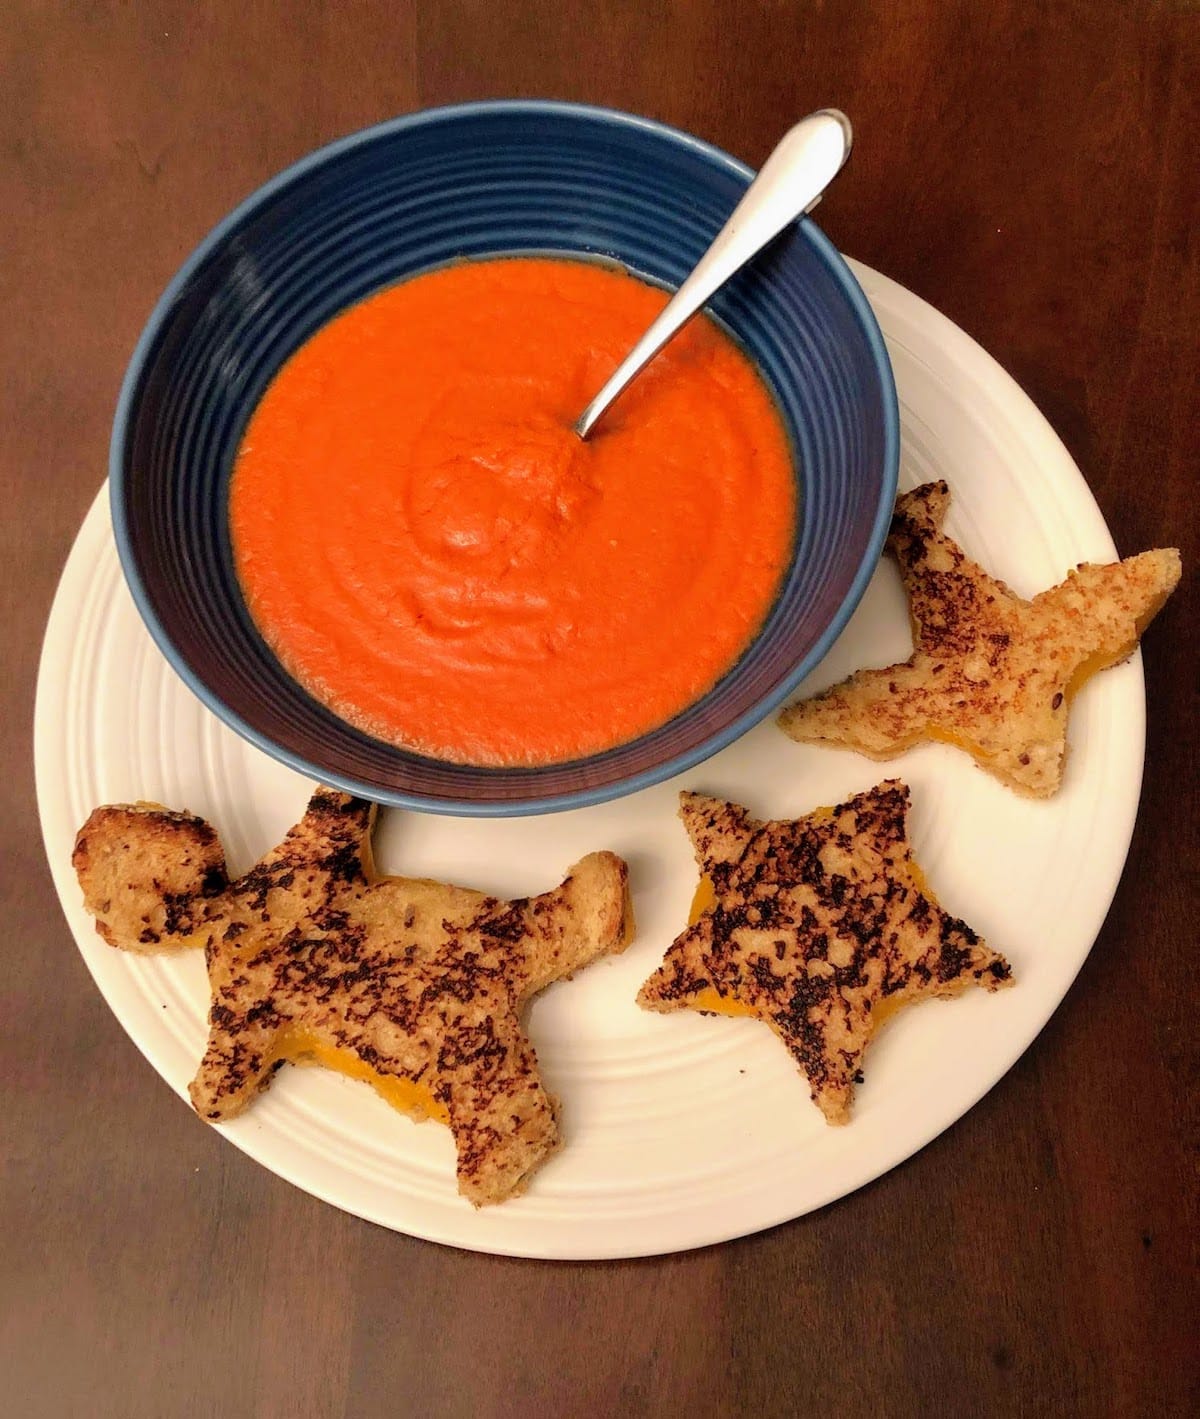 tomato soup and grilled cheese plated